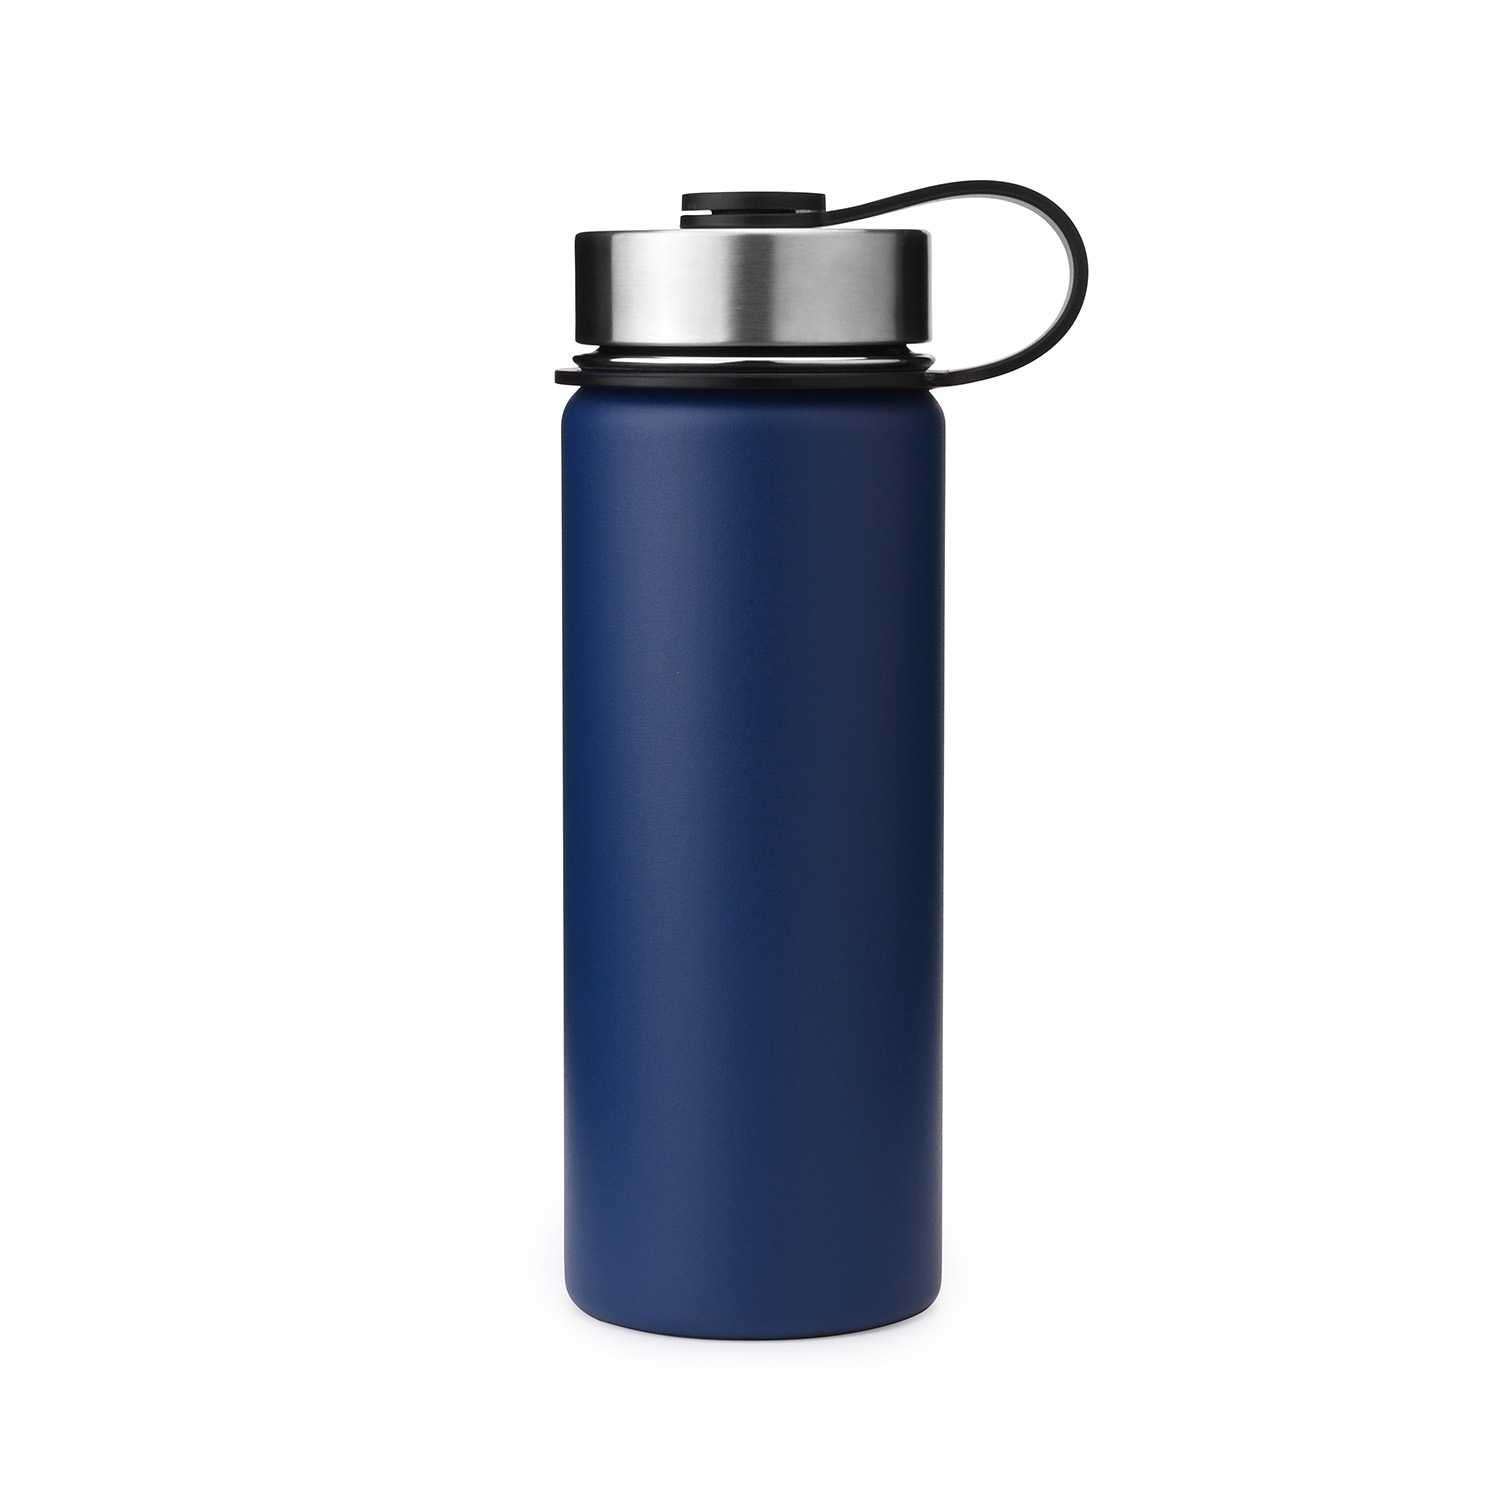 https://www.waterbottle.tech/wp-content/uploads/2018/10/insulated-durable-powder-coated-wide-mouth-water-bottle-18-oz-with-stainless-steel-cap-1.jpg